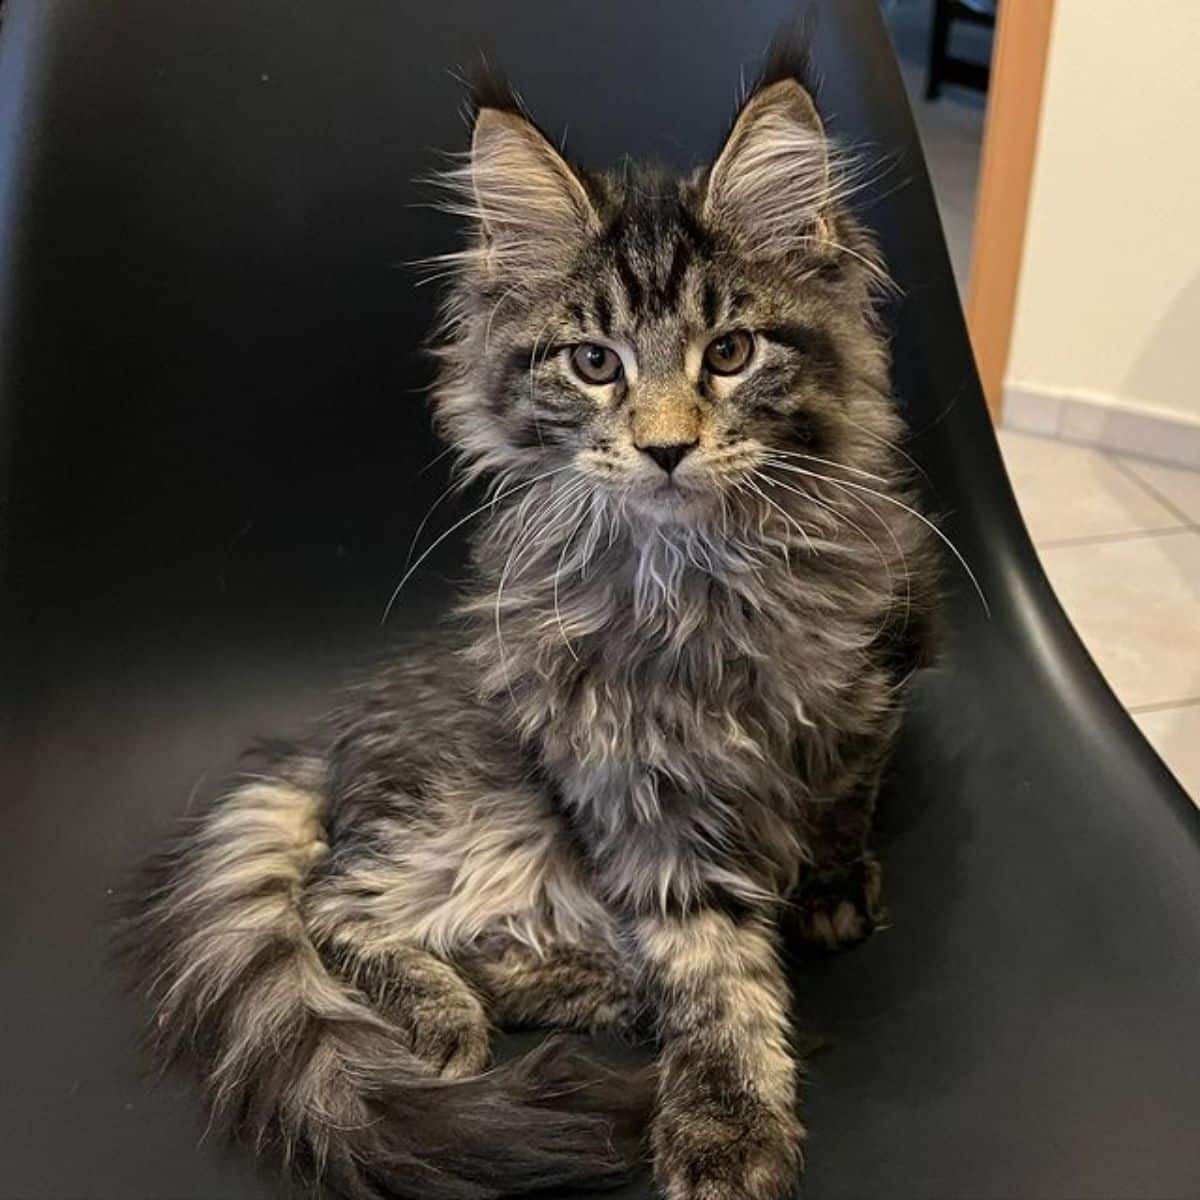 A fluffy tabby maine coon sitting on a black chair.